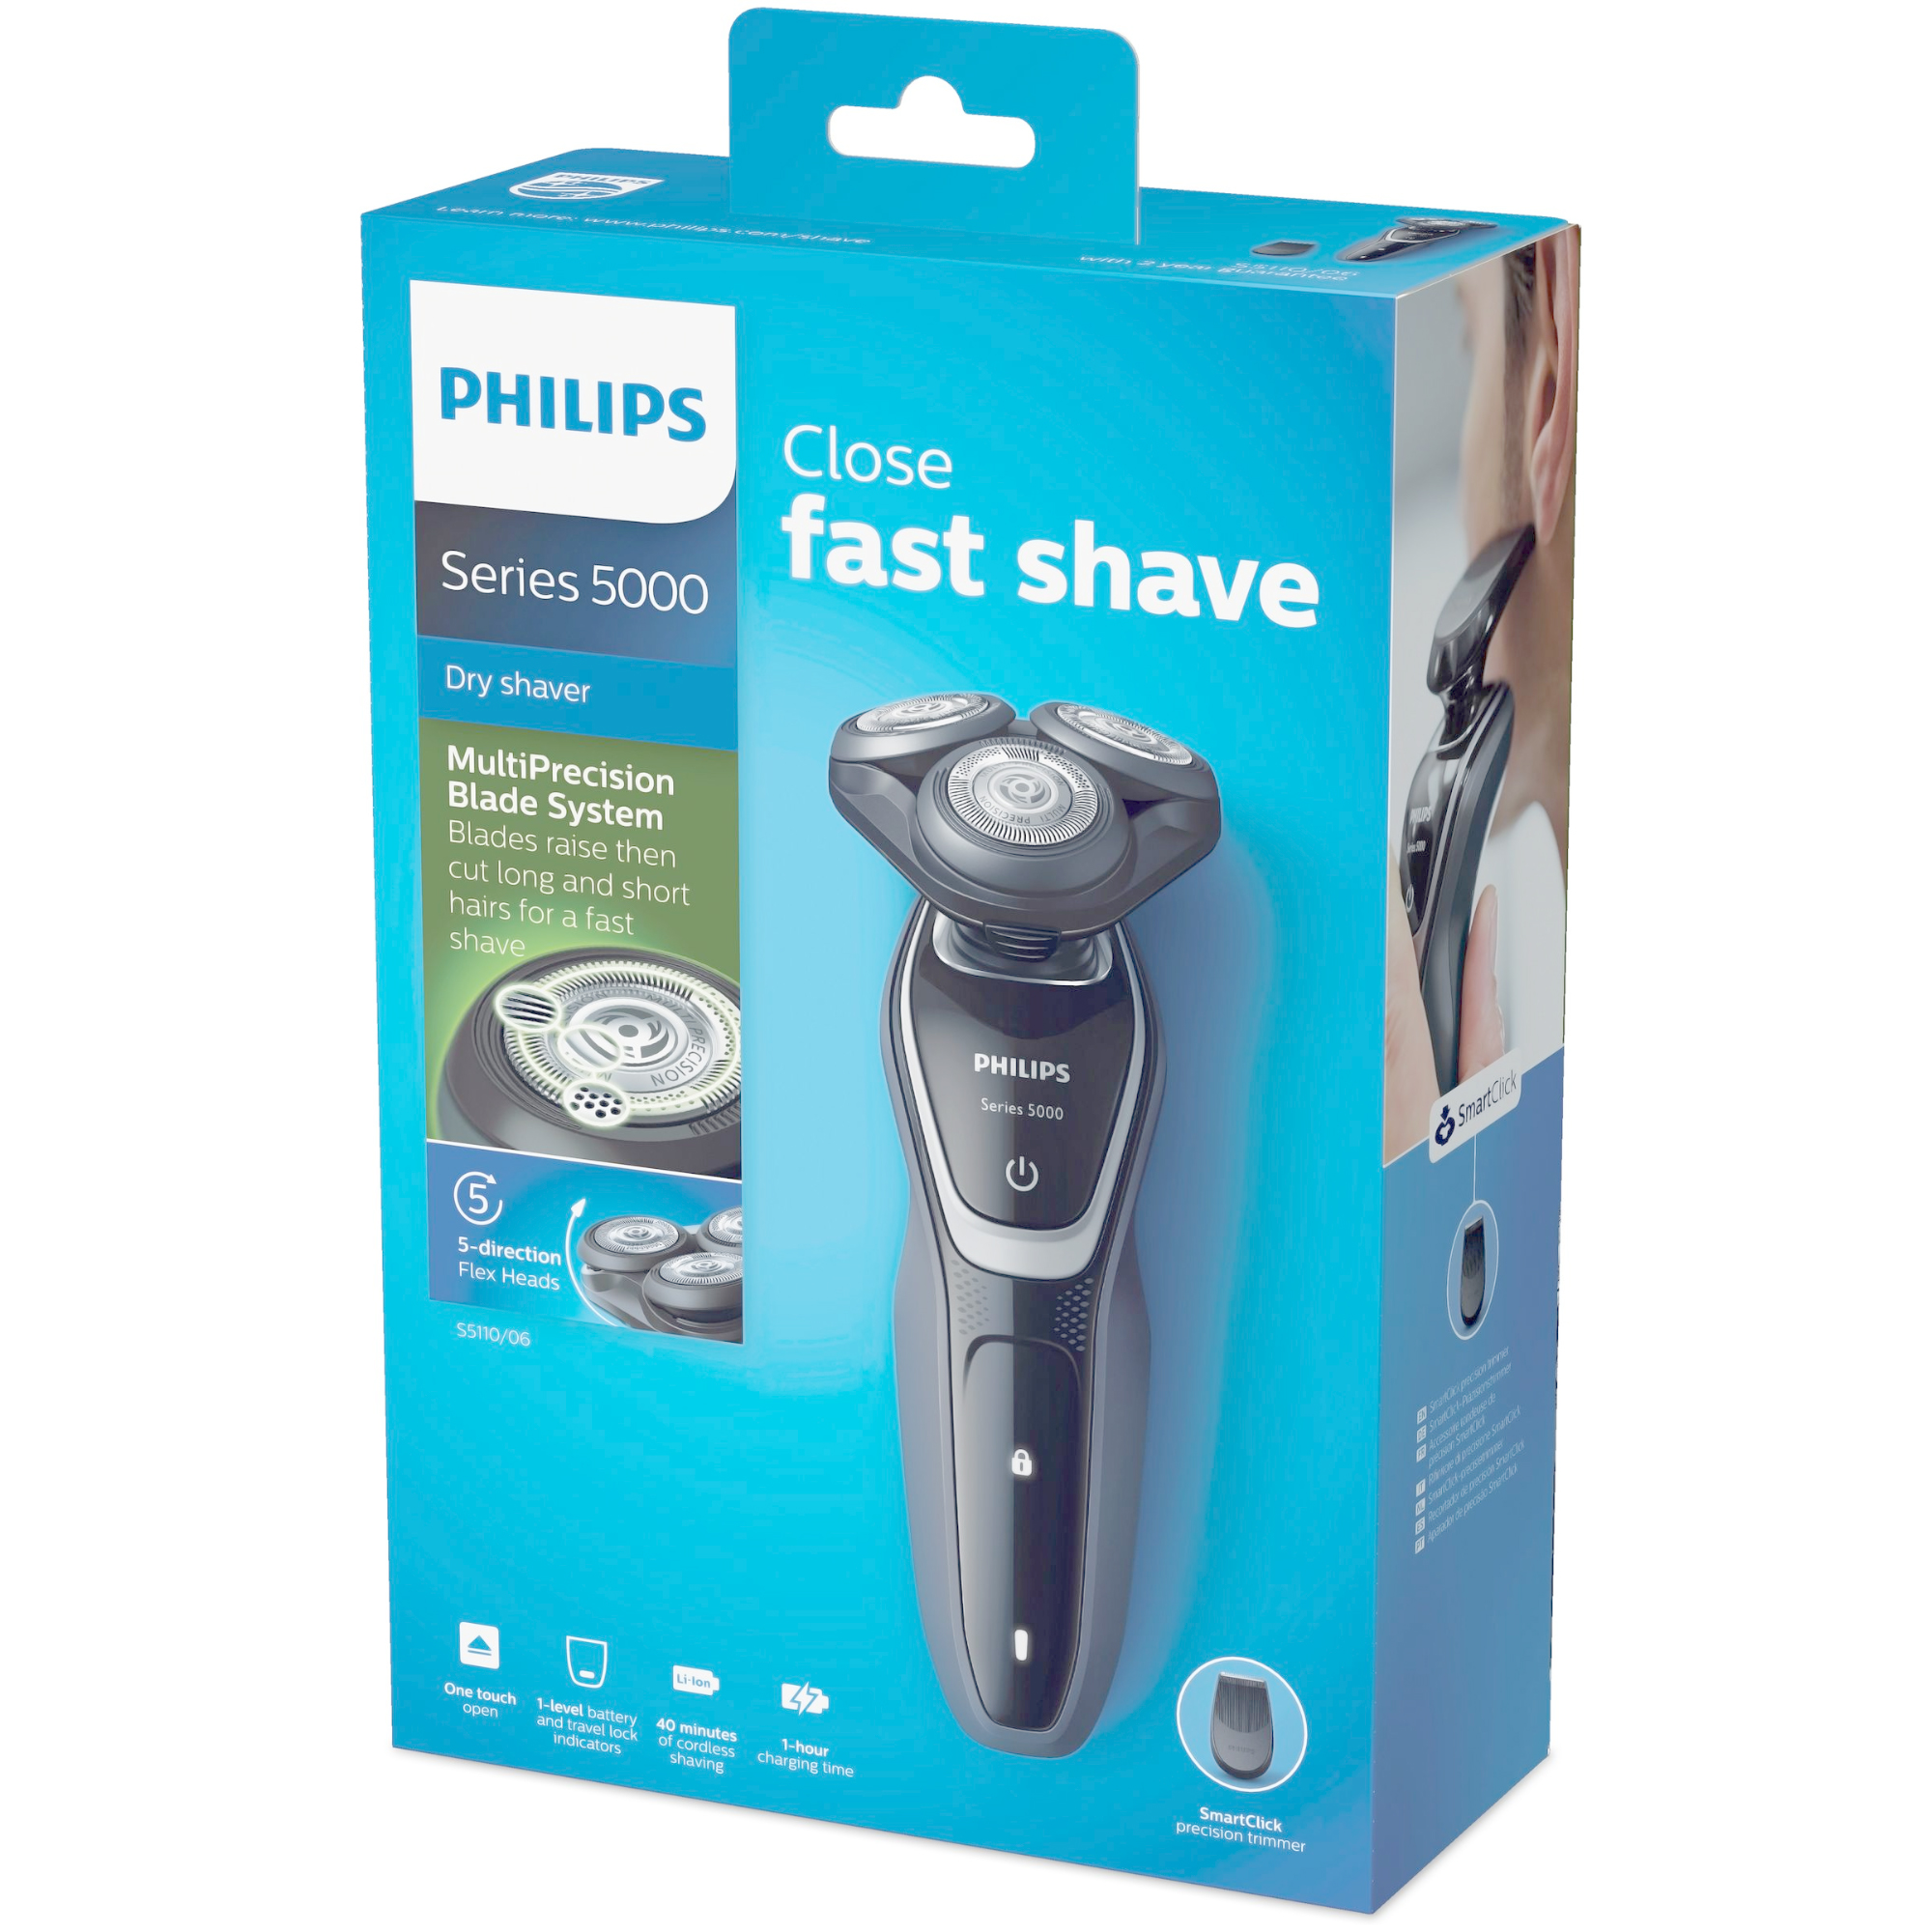 PHILIPS dry electric shaver with precision trimmer - GotDeal